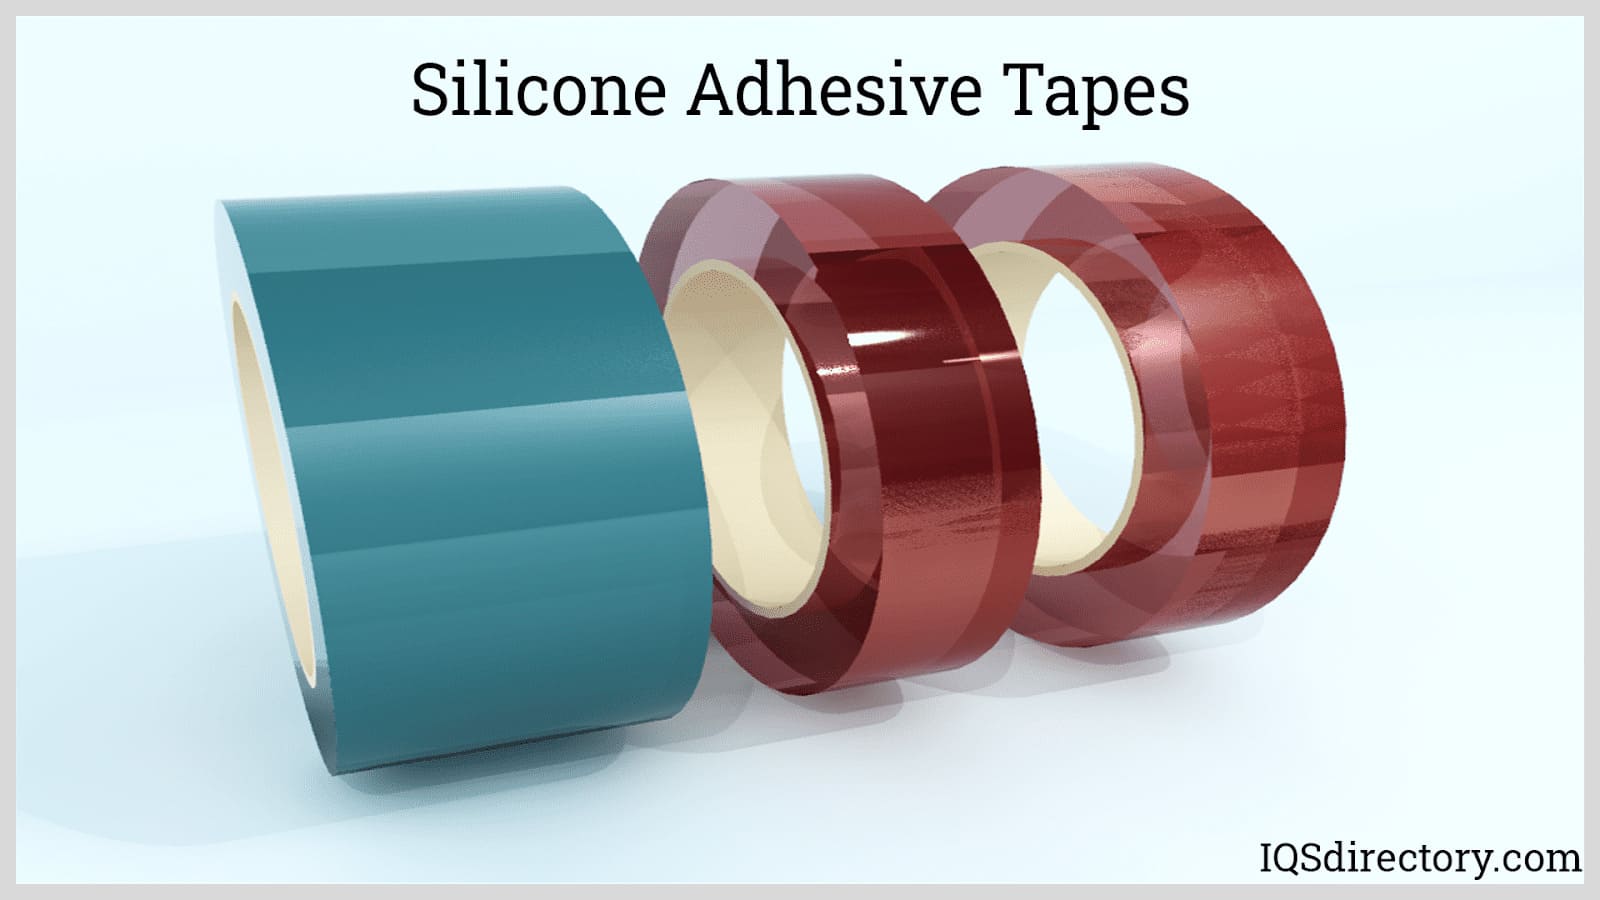 Silicone Adhesive Tapes